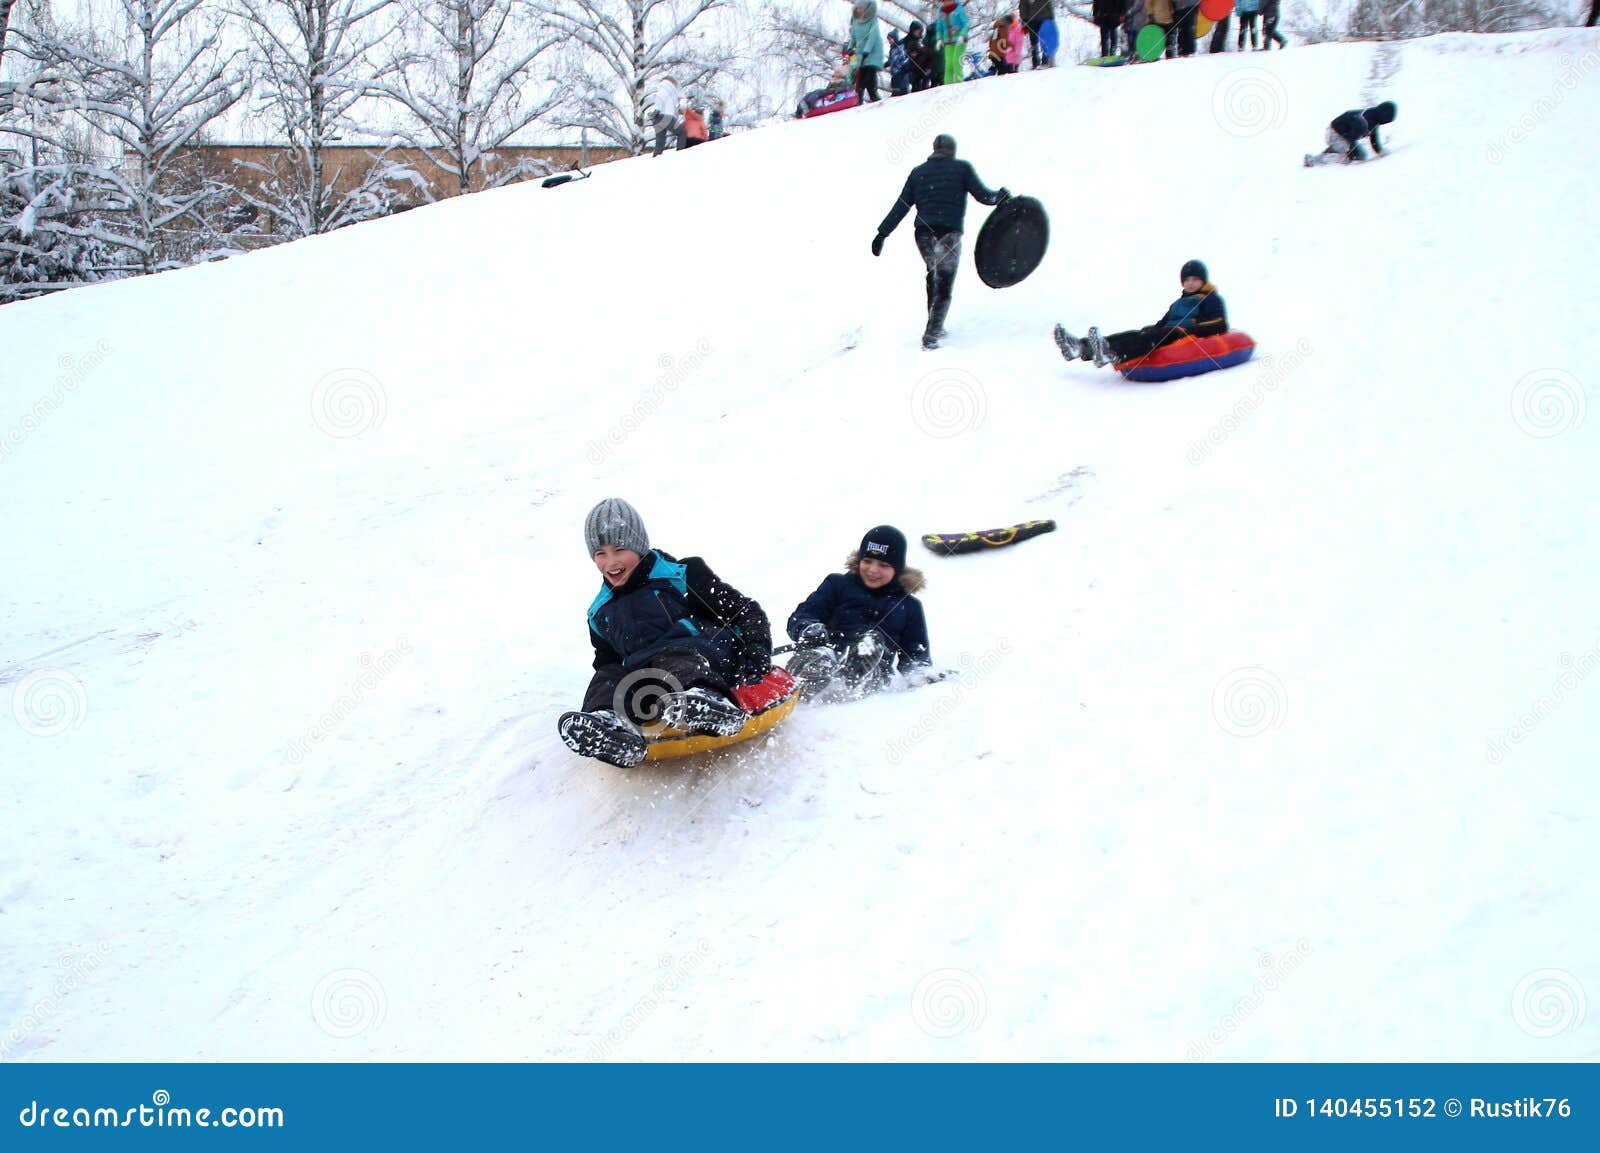 The Boys Go Down On A Sled From A Snow Slide Clinging To